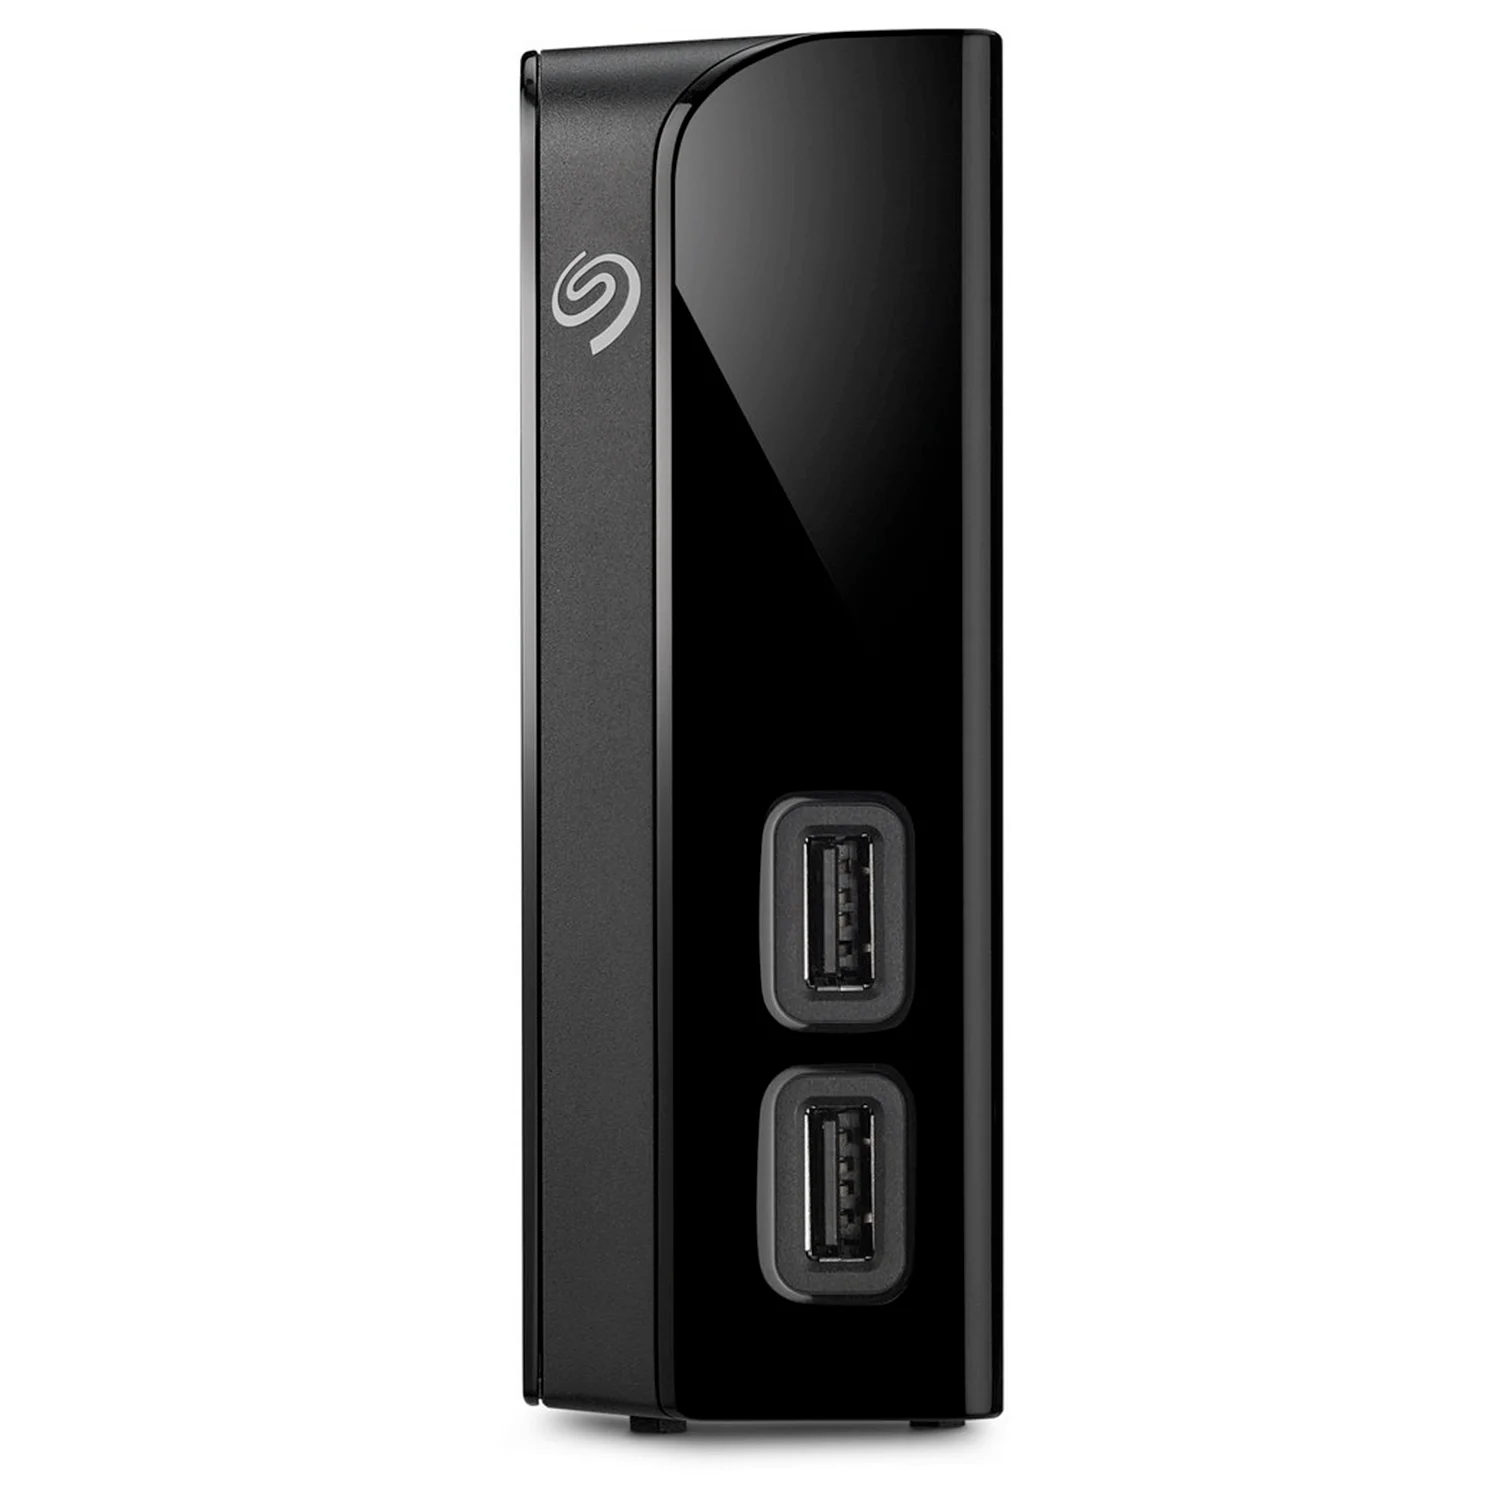 HD Externo Seagate Expansion Backup Plus 14TB - (STEL14000400)